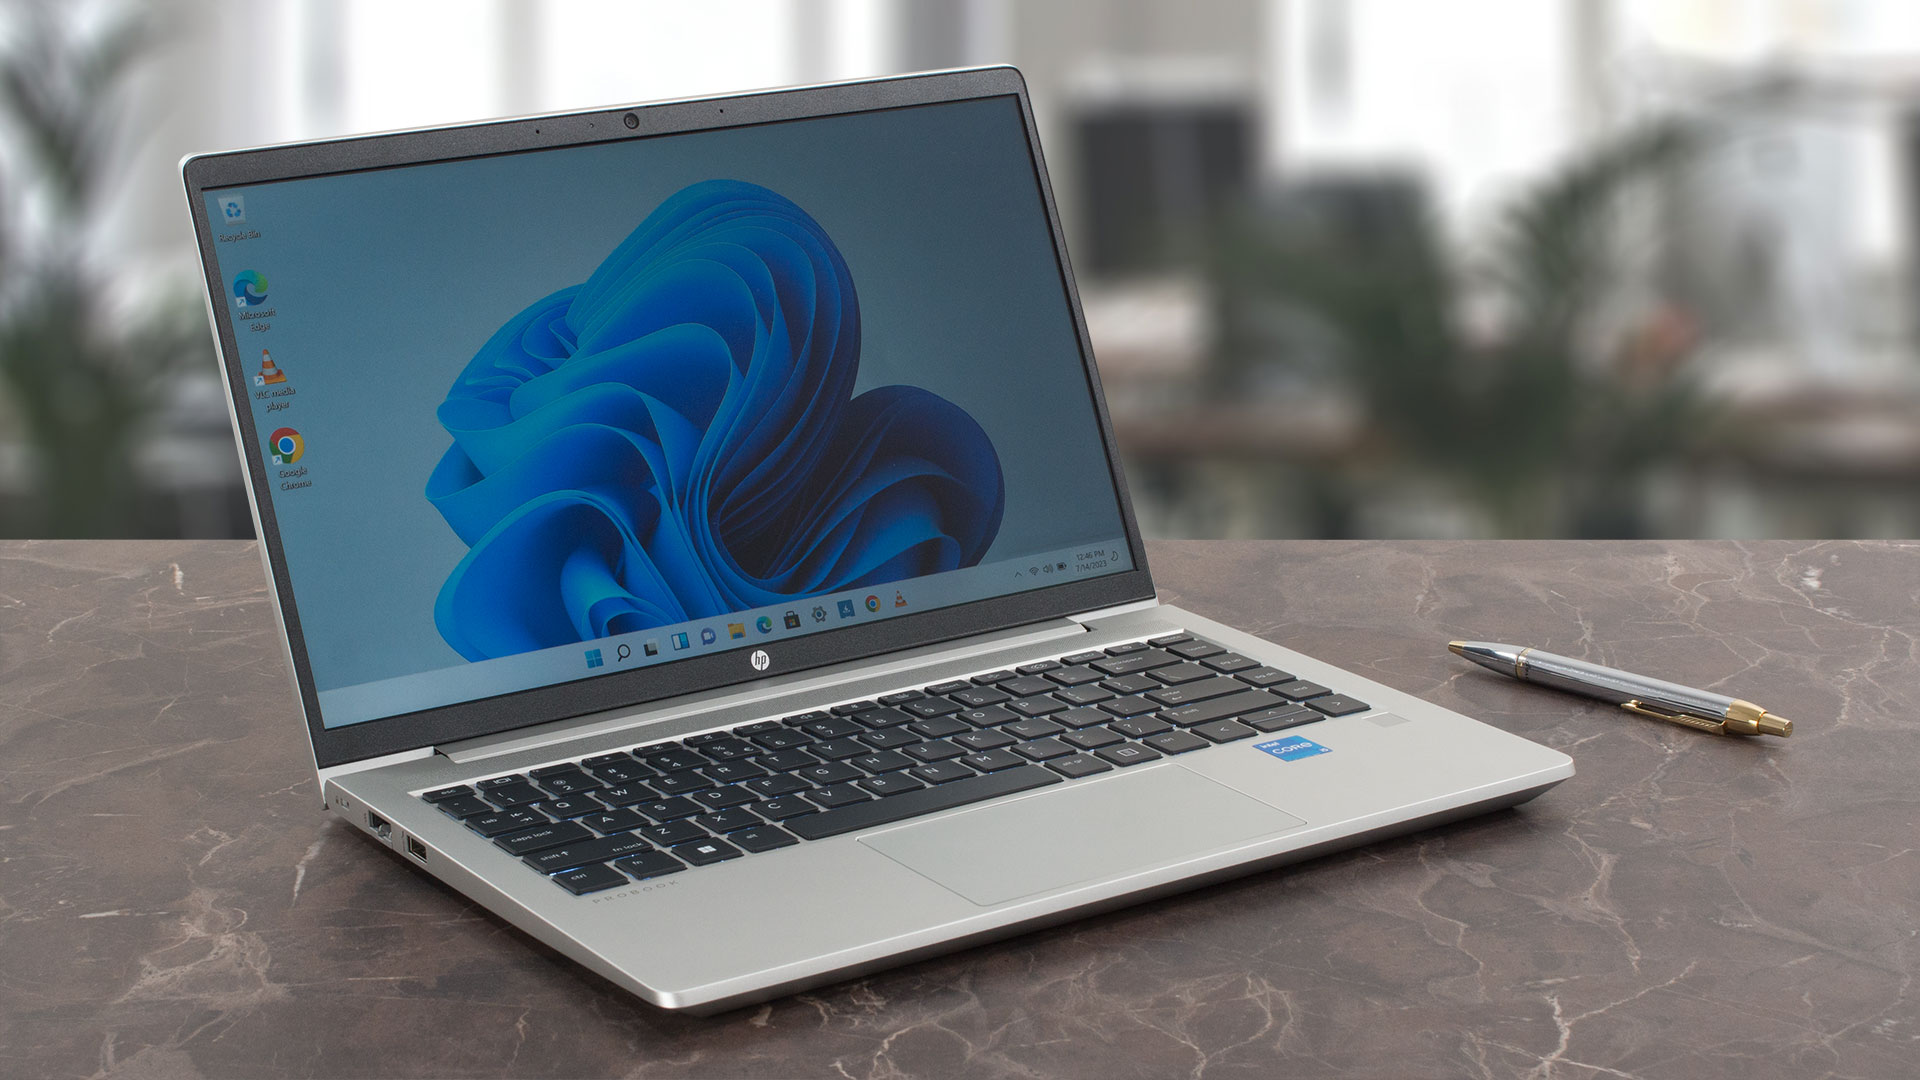 Review: HP ProBook 445 G7 Notebook PC – Features, Photos, Full